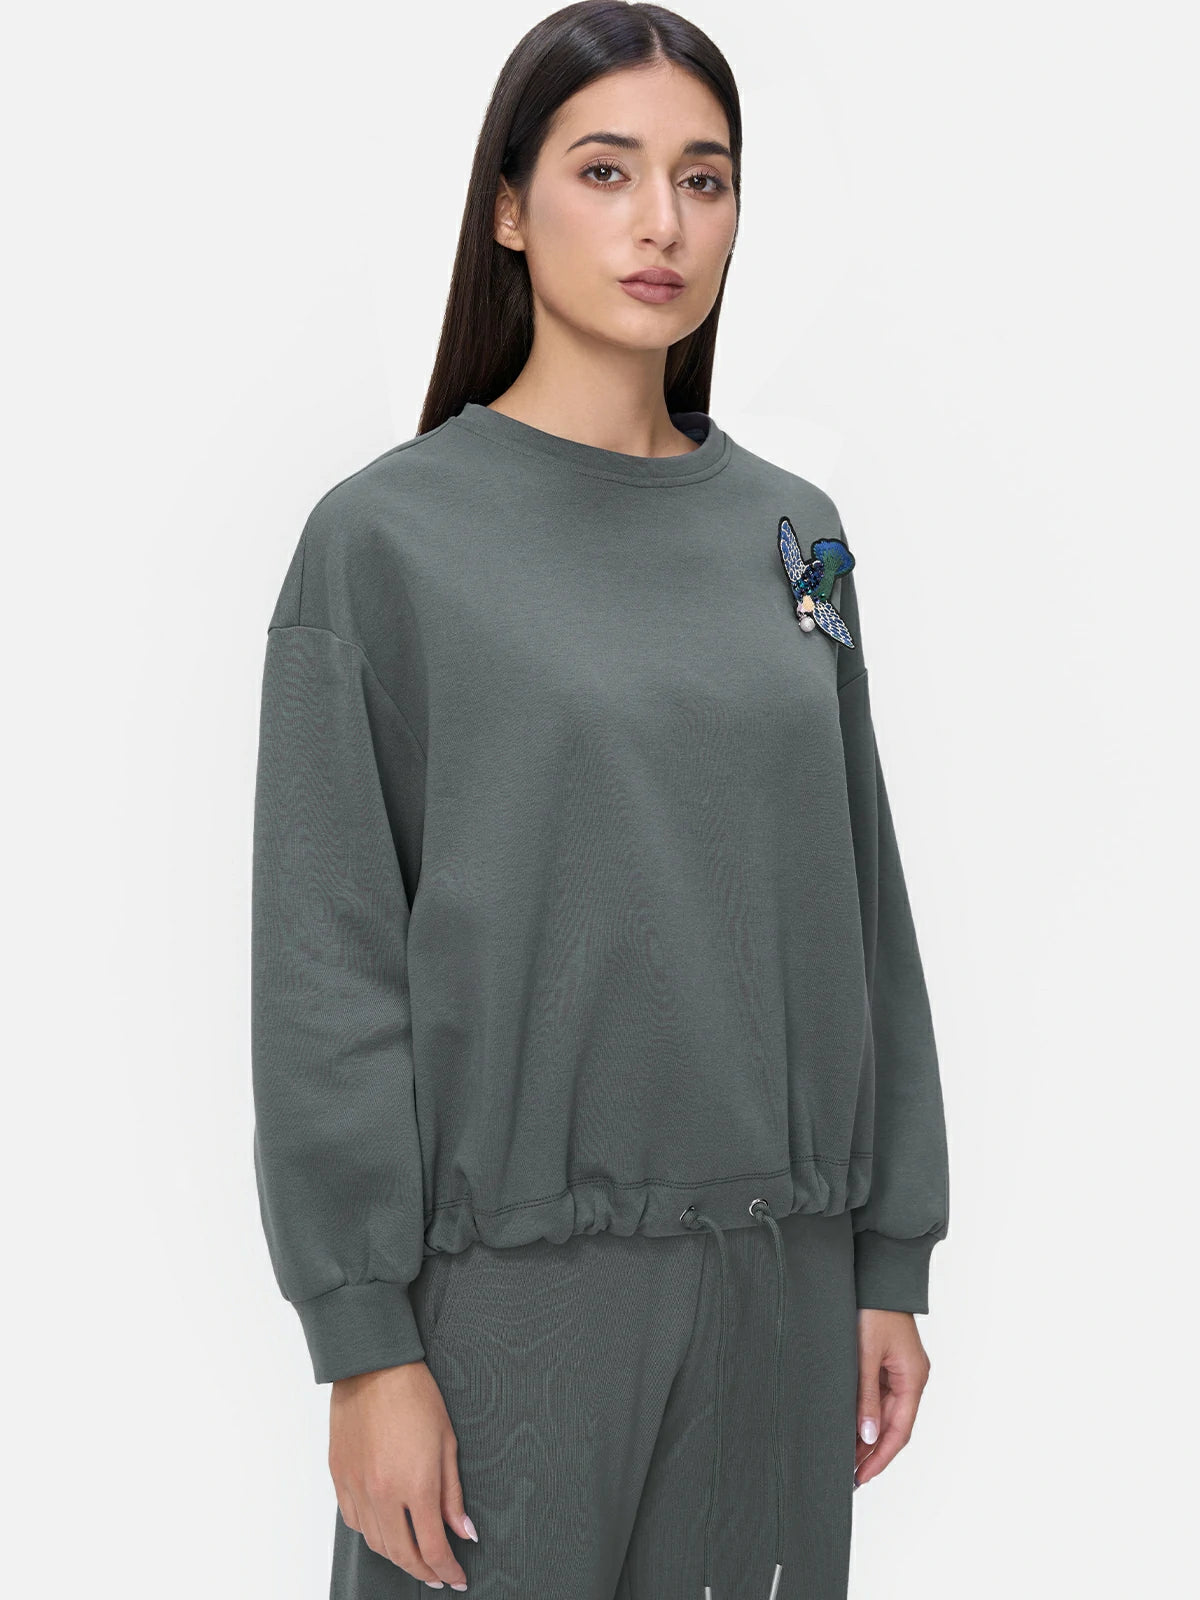 Comfortable and chic dropped-shoulder pullover